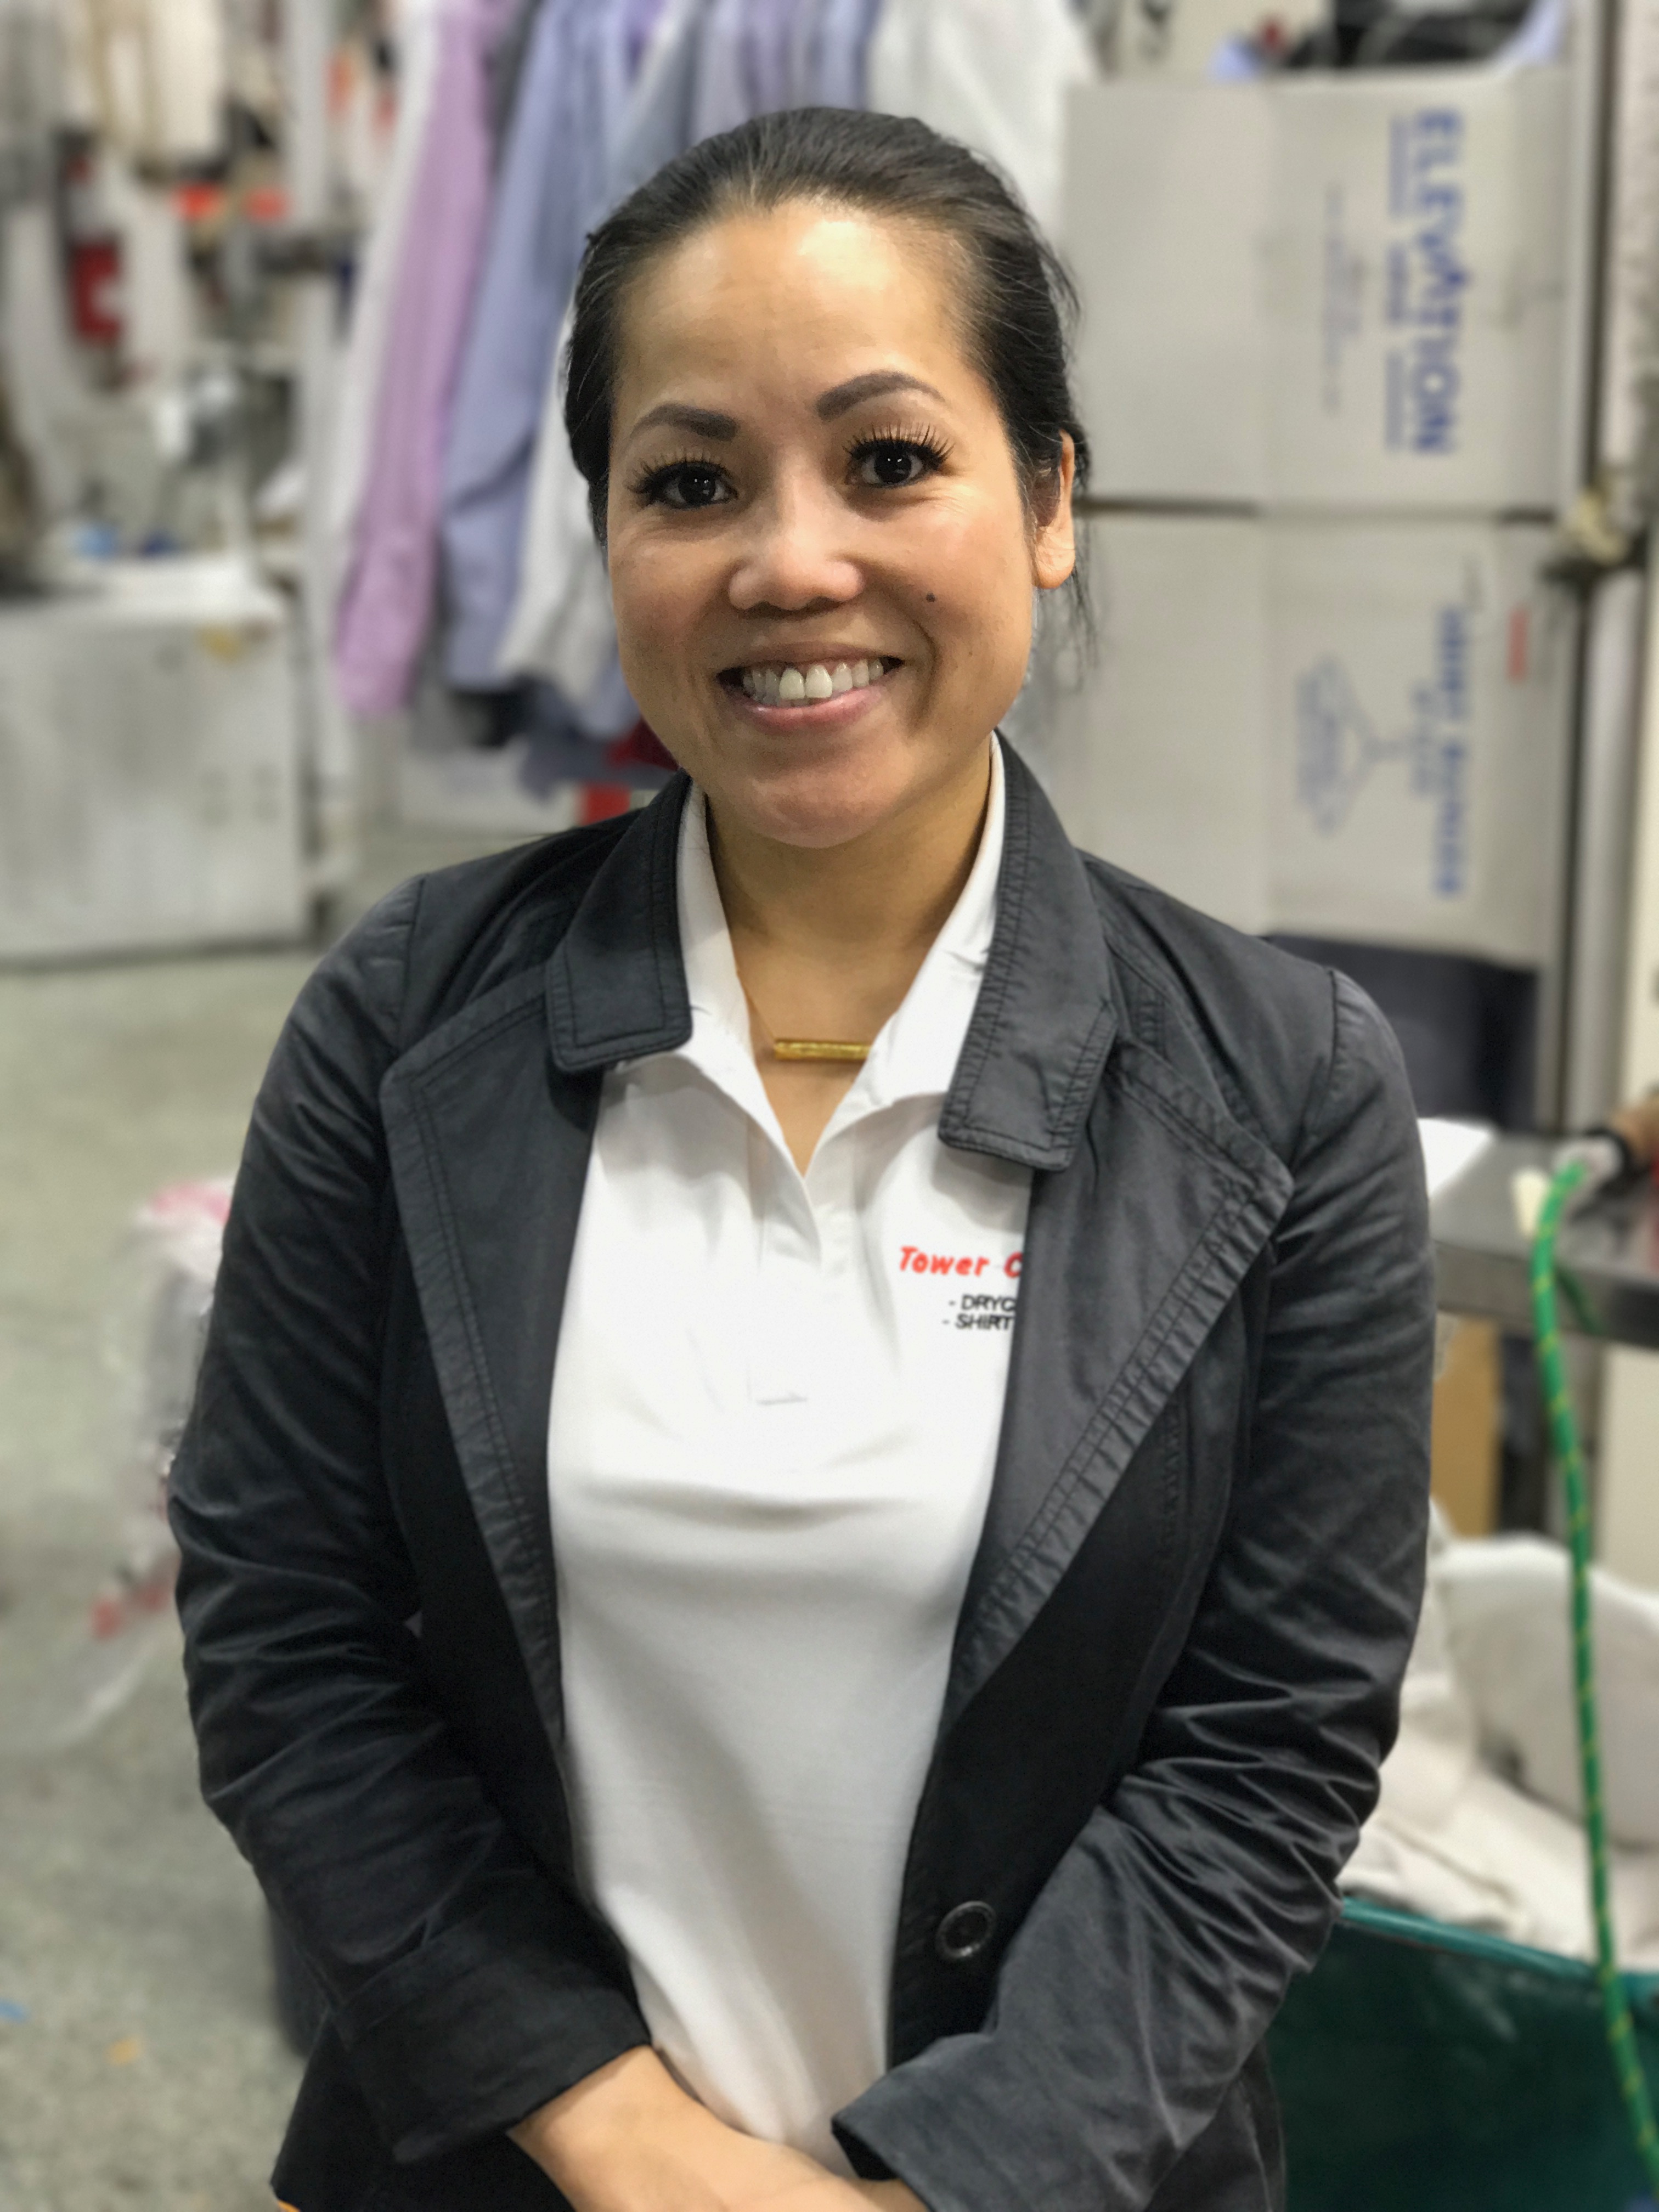 Nicky Pathammawong, Day Production Manager at Tower Cleaners